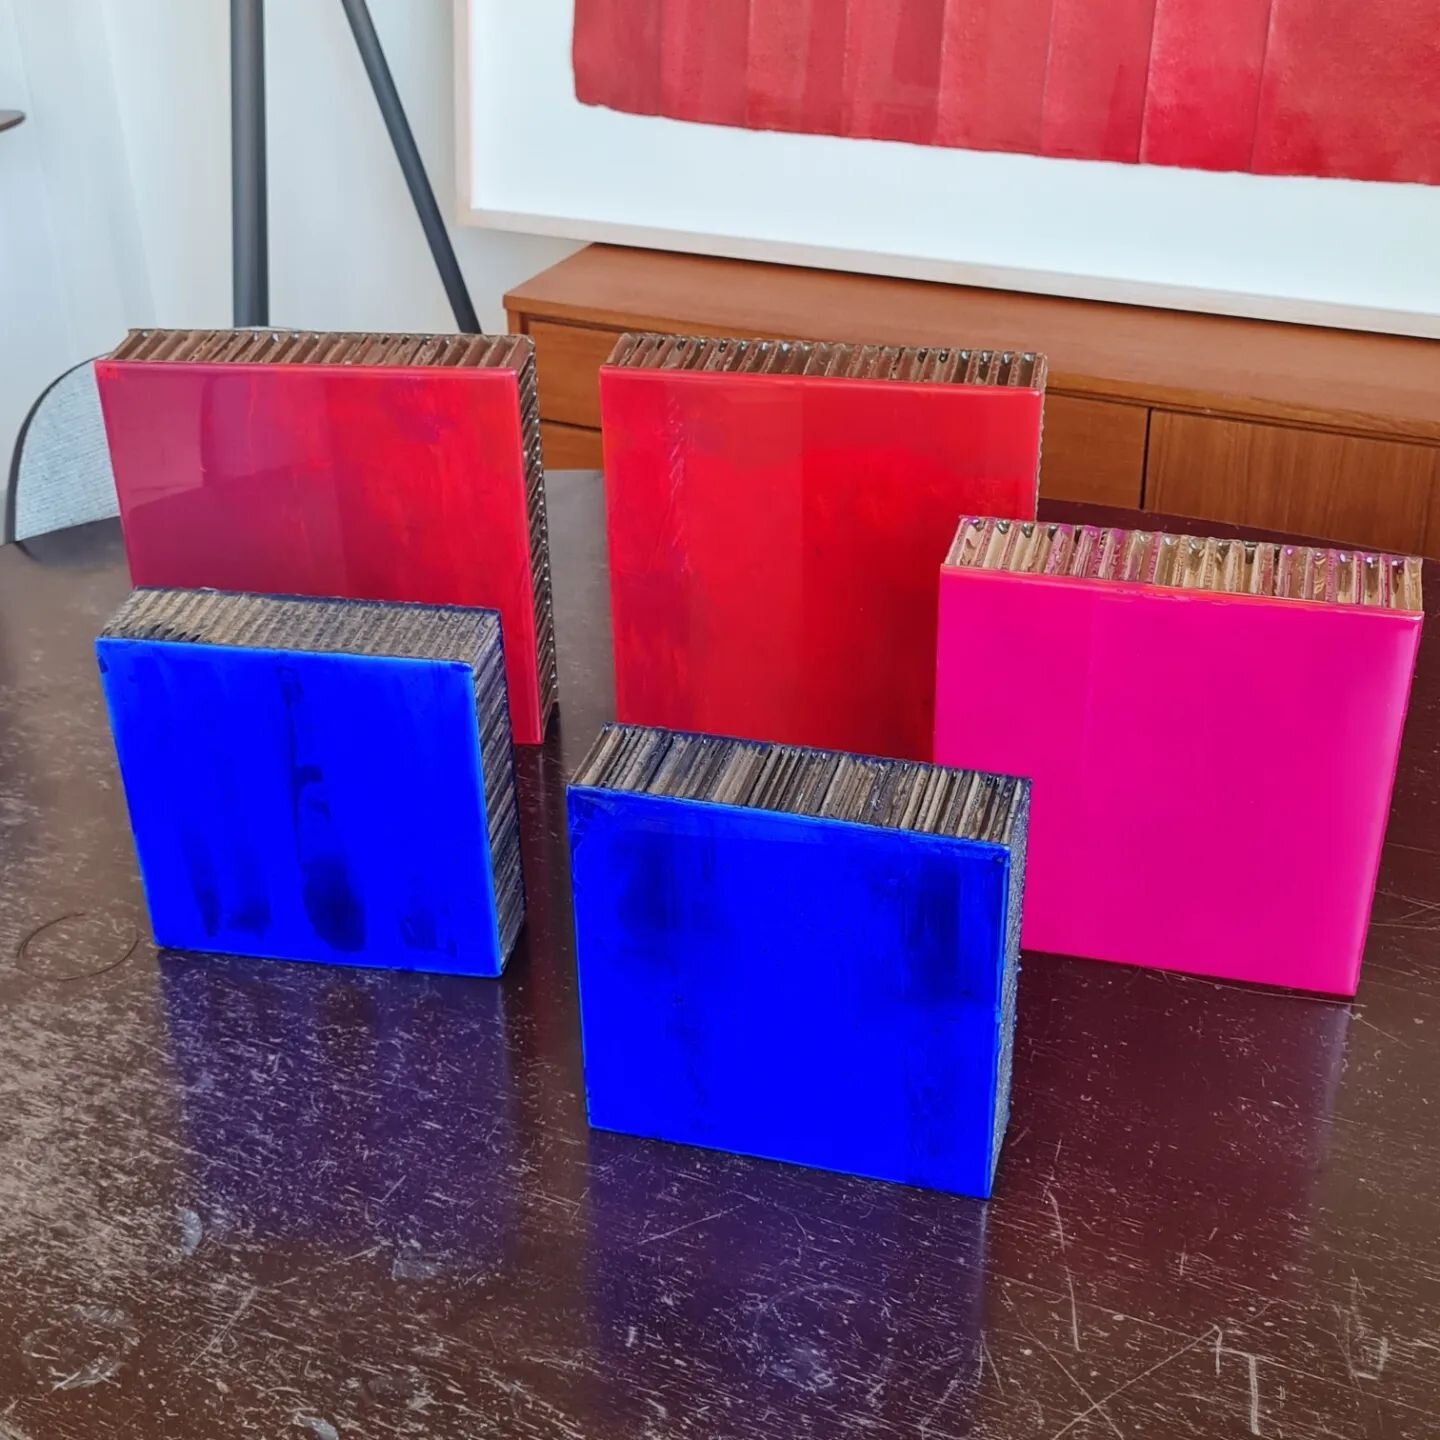 🎨💫 Available artworks in Geneva.&nbsp;PM if interested&nbsp;

V&eacute;ro Straubhaar&nbsp;
Glossy pieces&nbsp;
Colours: Blue, Magenta and Red&nbsp;
Sizes: 25 x 25 cm (magenta) / 28 x 28 cm (red) / 21.5 x 21.5cm (Yves Klein blue)
...

V&eacute;ro St